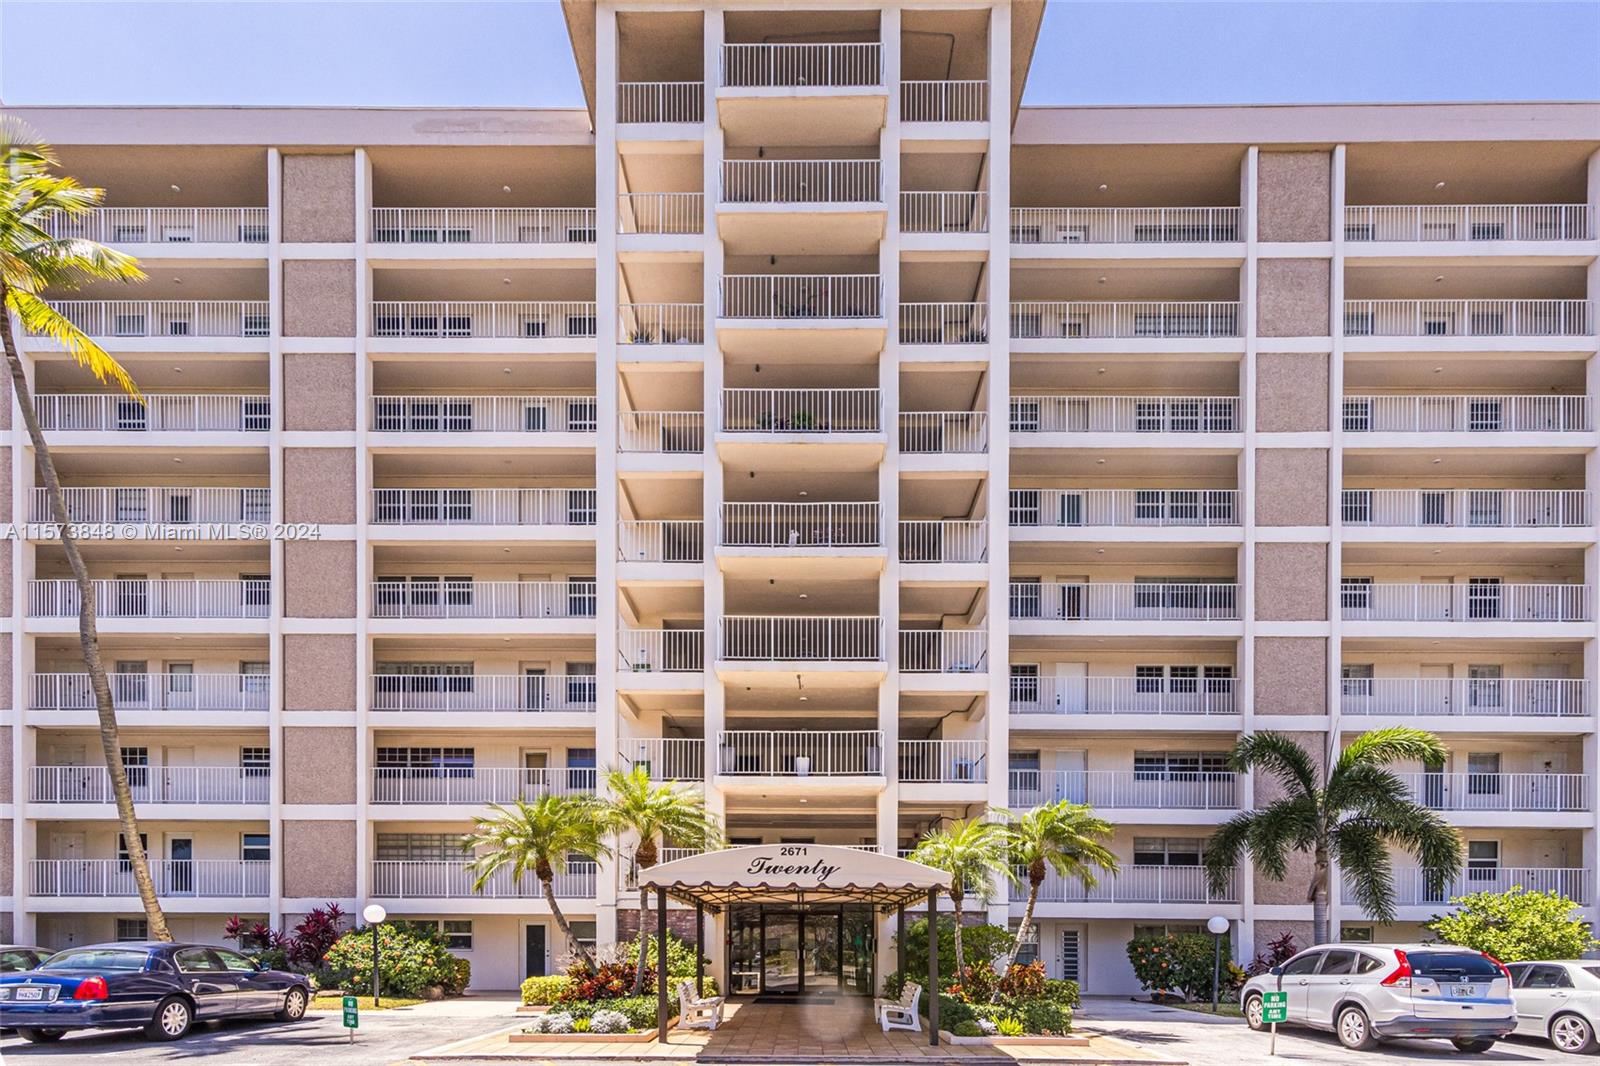 2671 S Course Dr 506, Pompano Beach, Florida 33069, 2 Bedrooms Bedrooms, ,2 BathroomsBathrooms,Residentiallease,For Rent,2671 S Course Dr 506,A11573848